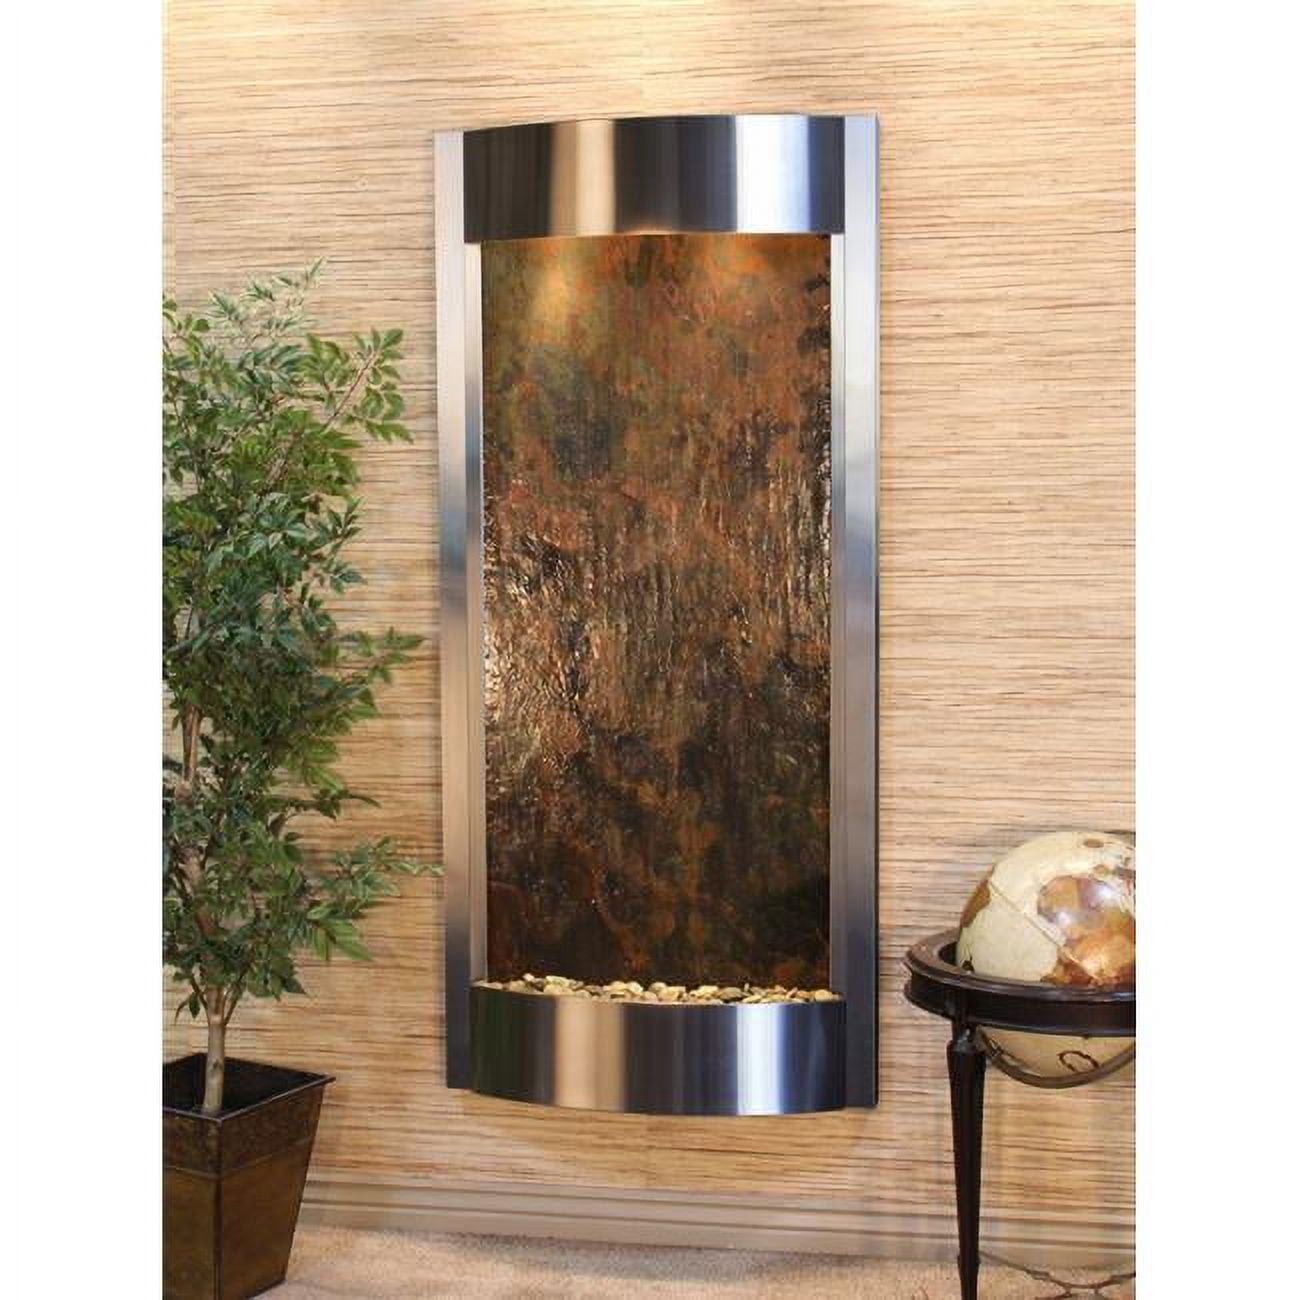 Adagio PWA2014 Pacifica Waters Stainless Steel Multicolor Featherstone Wall Fountain